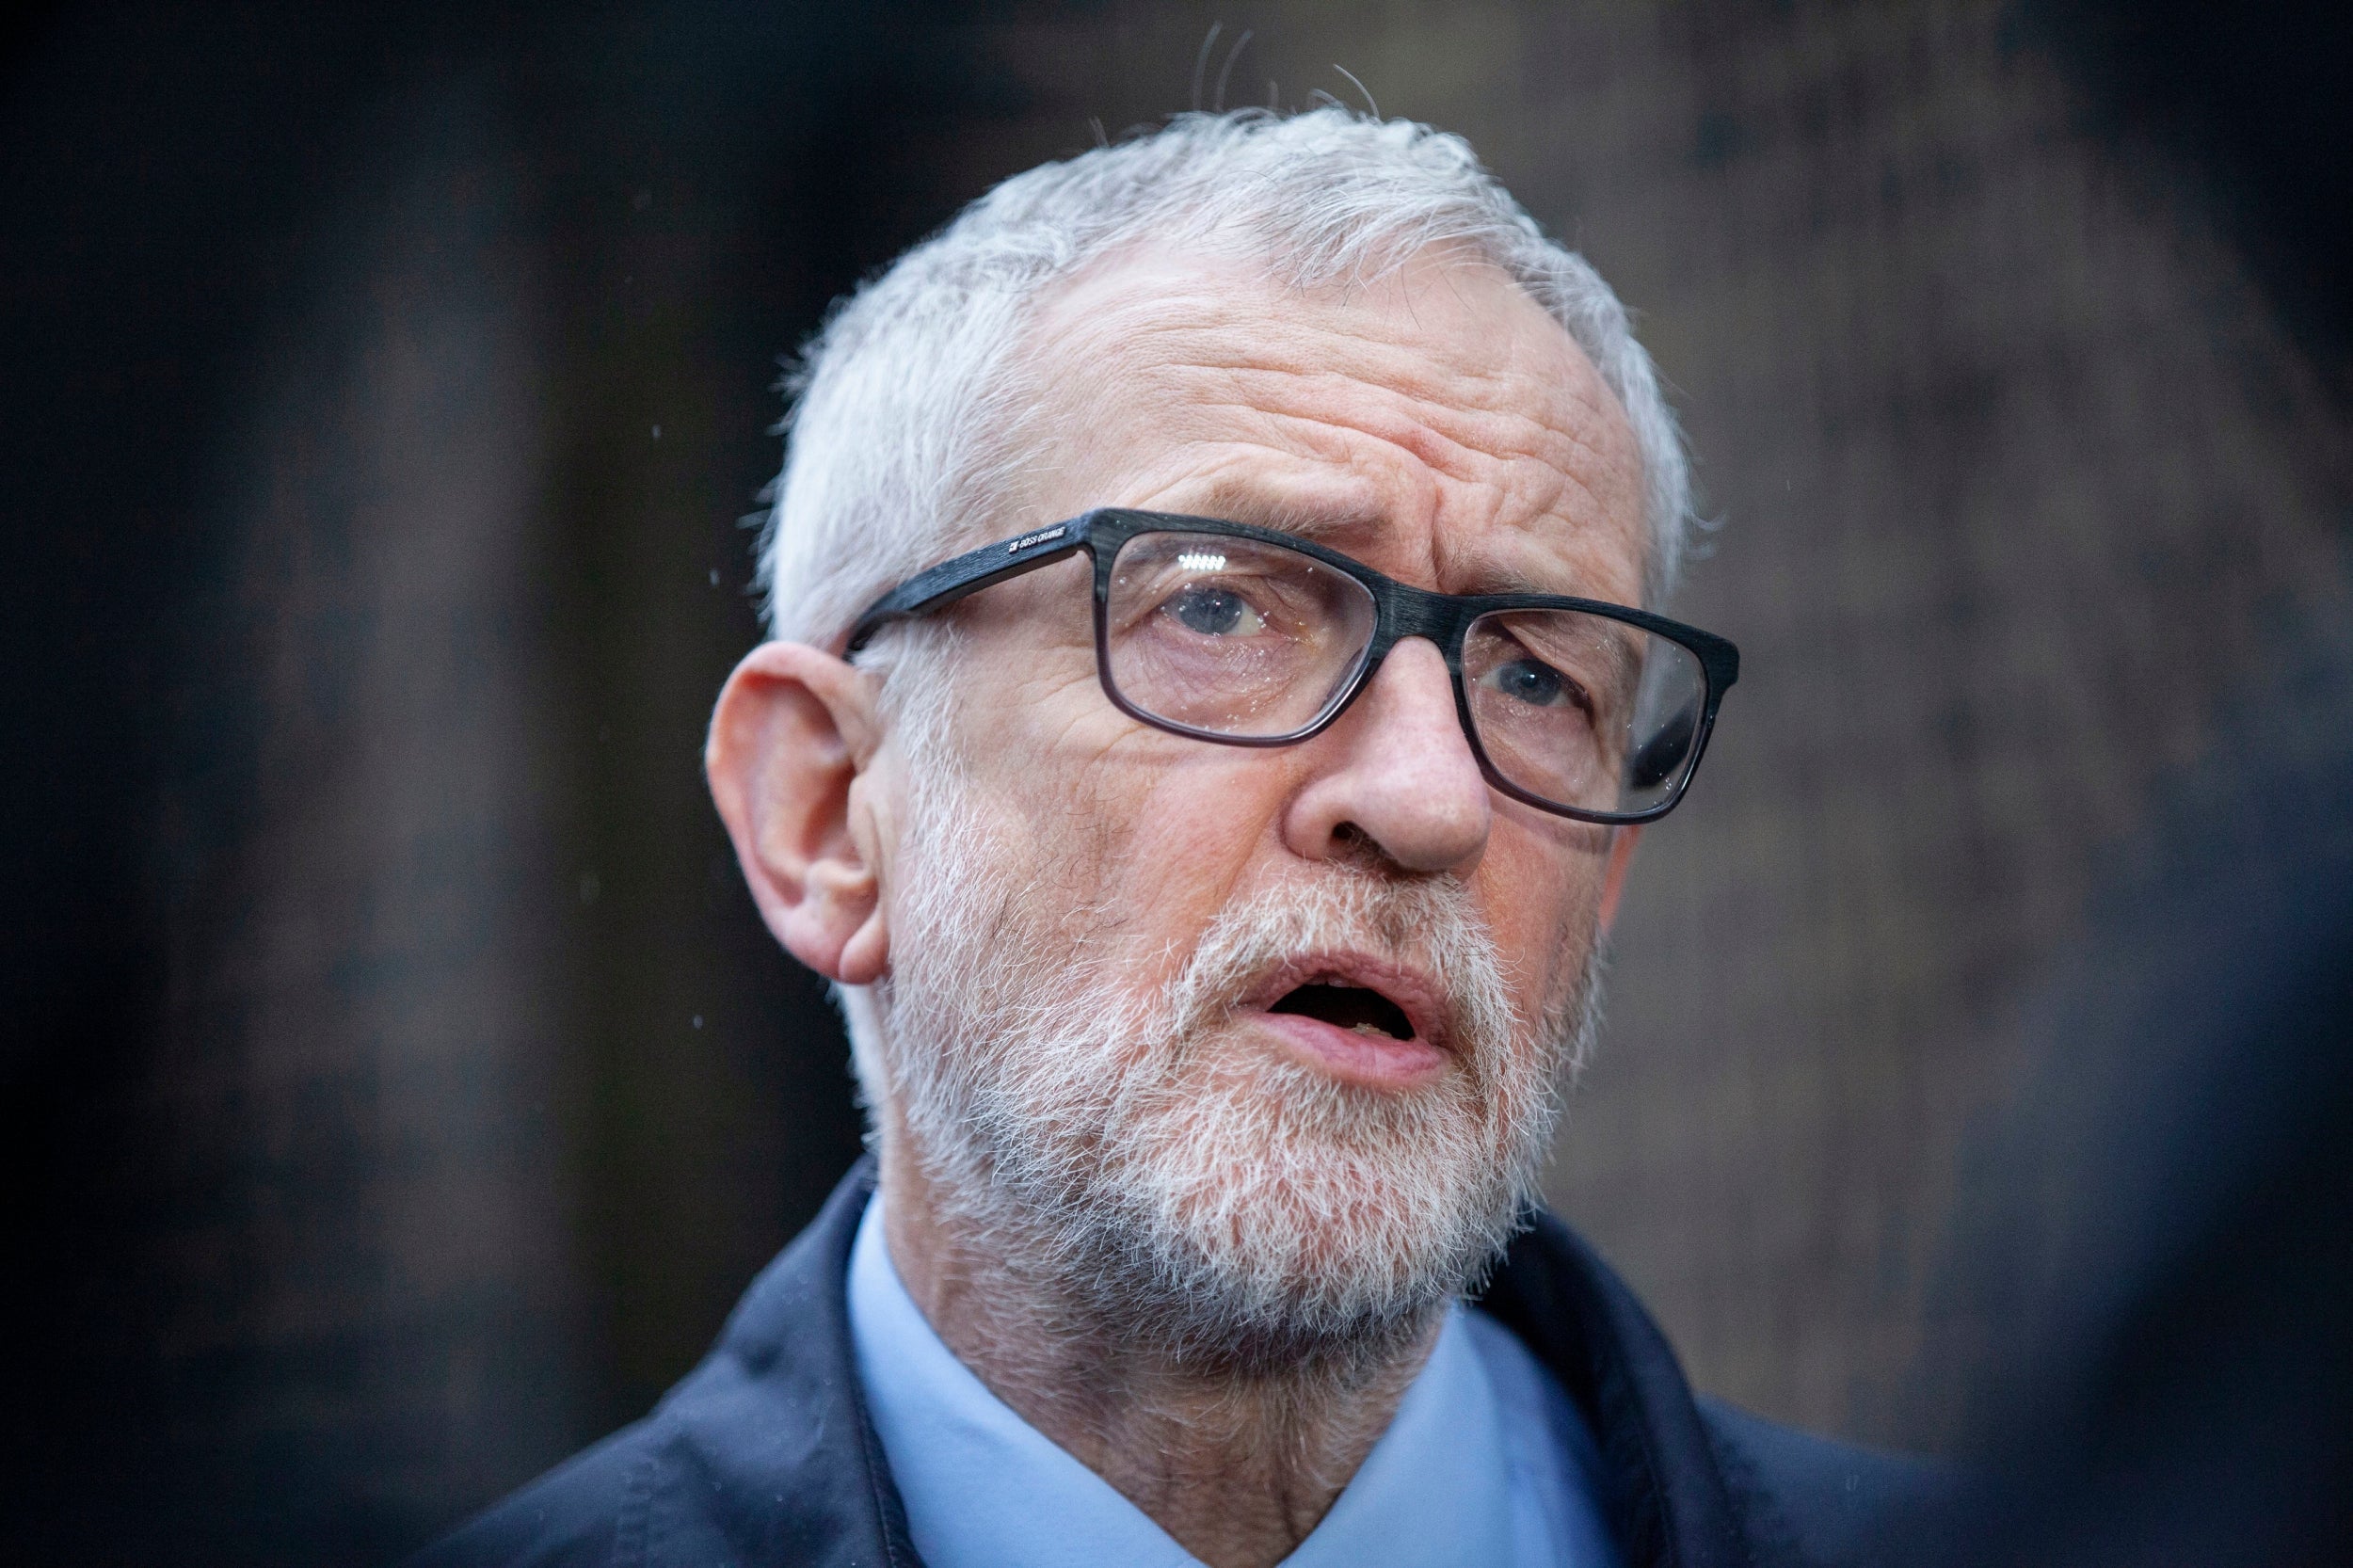 Labour party leader Jeremy Corbyn speaks to the media on the coronavirus pandemic outside the Finsbury Park Jobcentre, north London, on 15 March 2020.